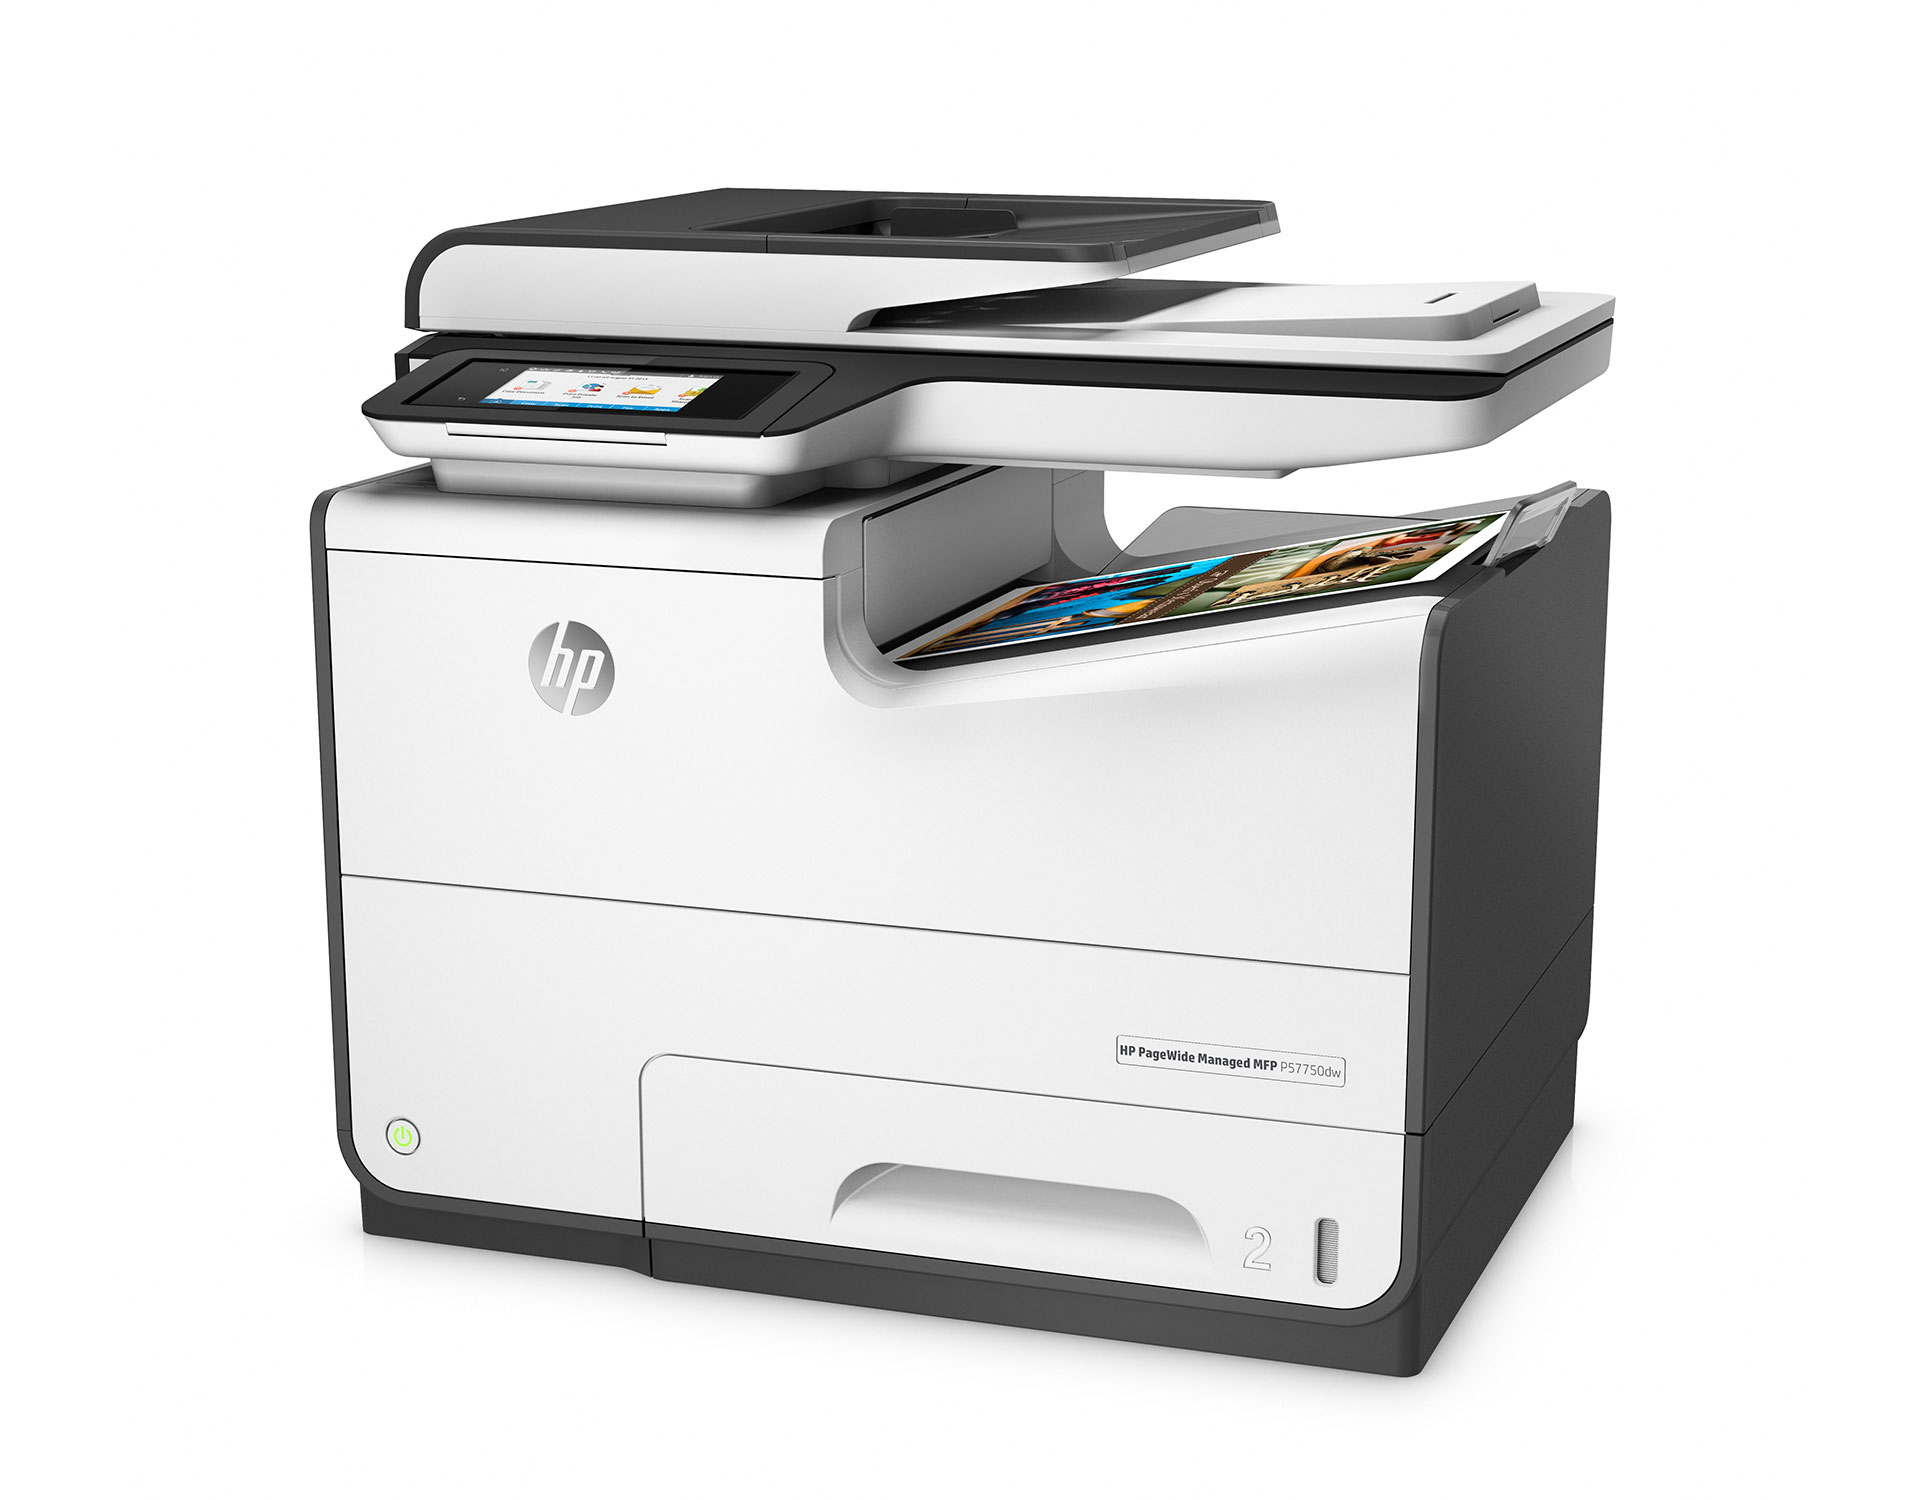 HP PageWide Managed MFP P57750dw